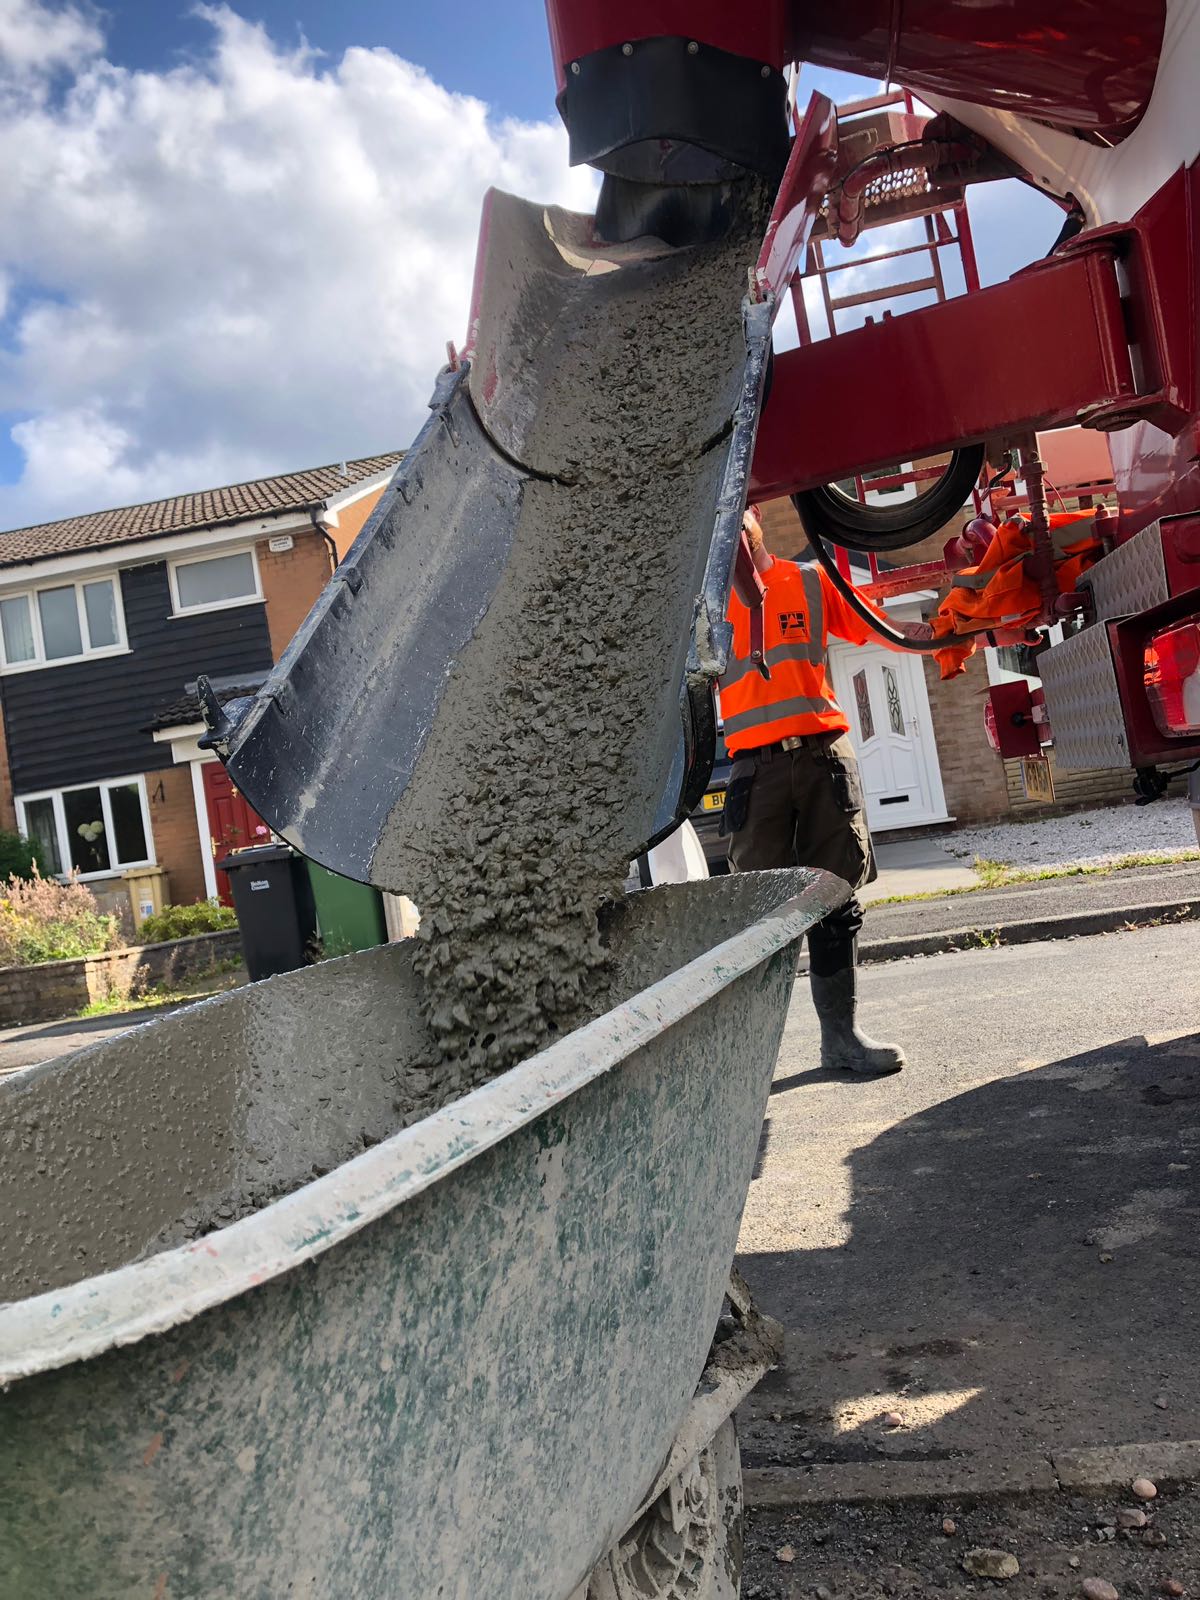 Pouring concrete in residential area